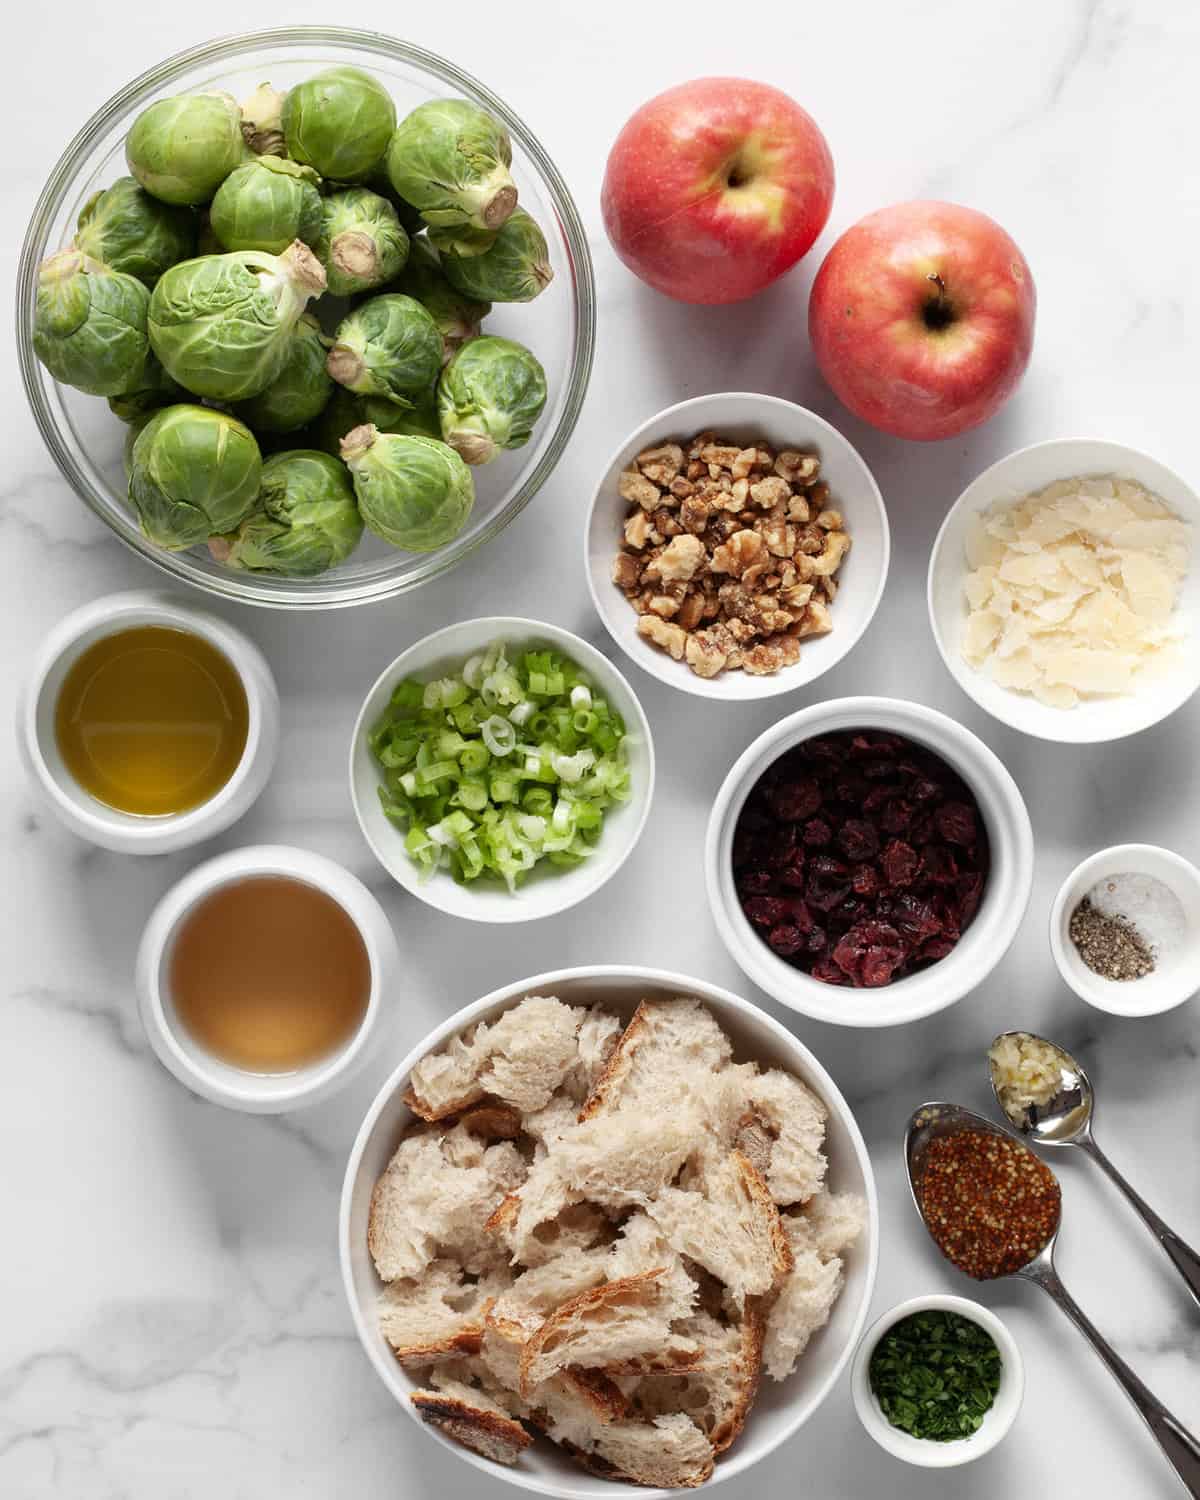 Ingredients including brussels sprouts, apples, walnuts, scallions, bread, cranberries, parmesan, olive oil, white wine vinegar, mustard and garlic.